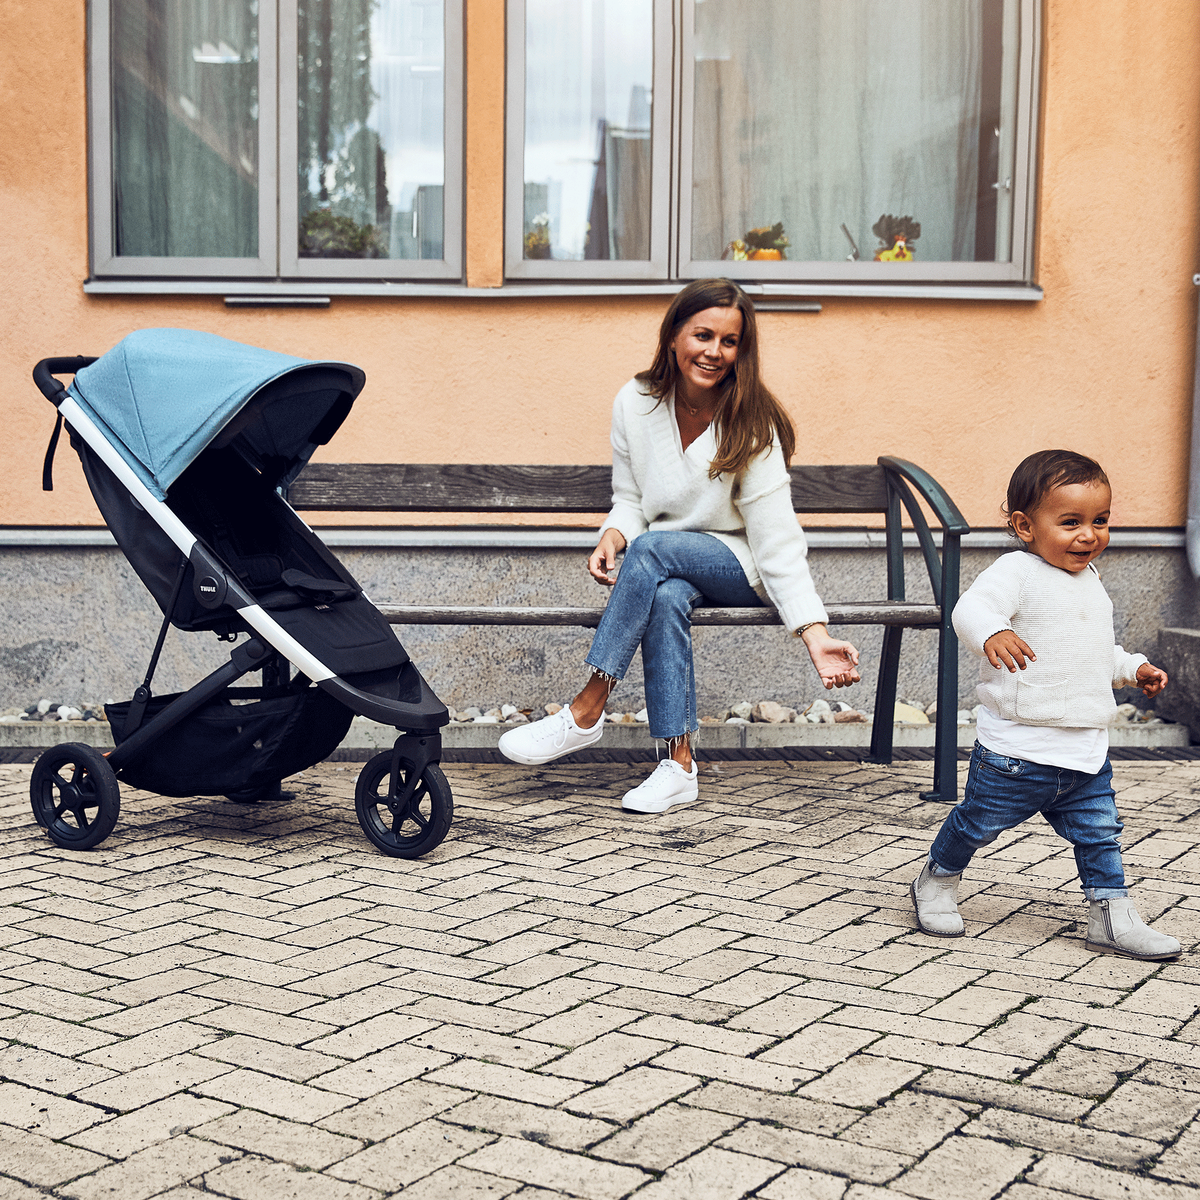 A woman sits on a bench while her child runs around a blue Thule Spring compact stroller.